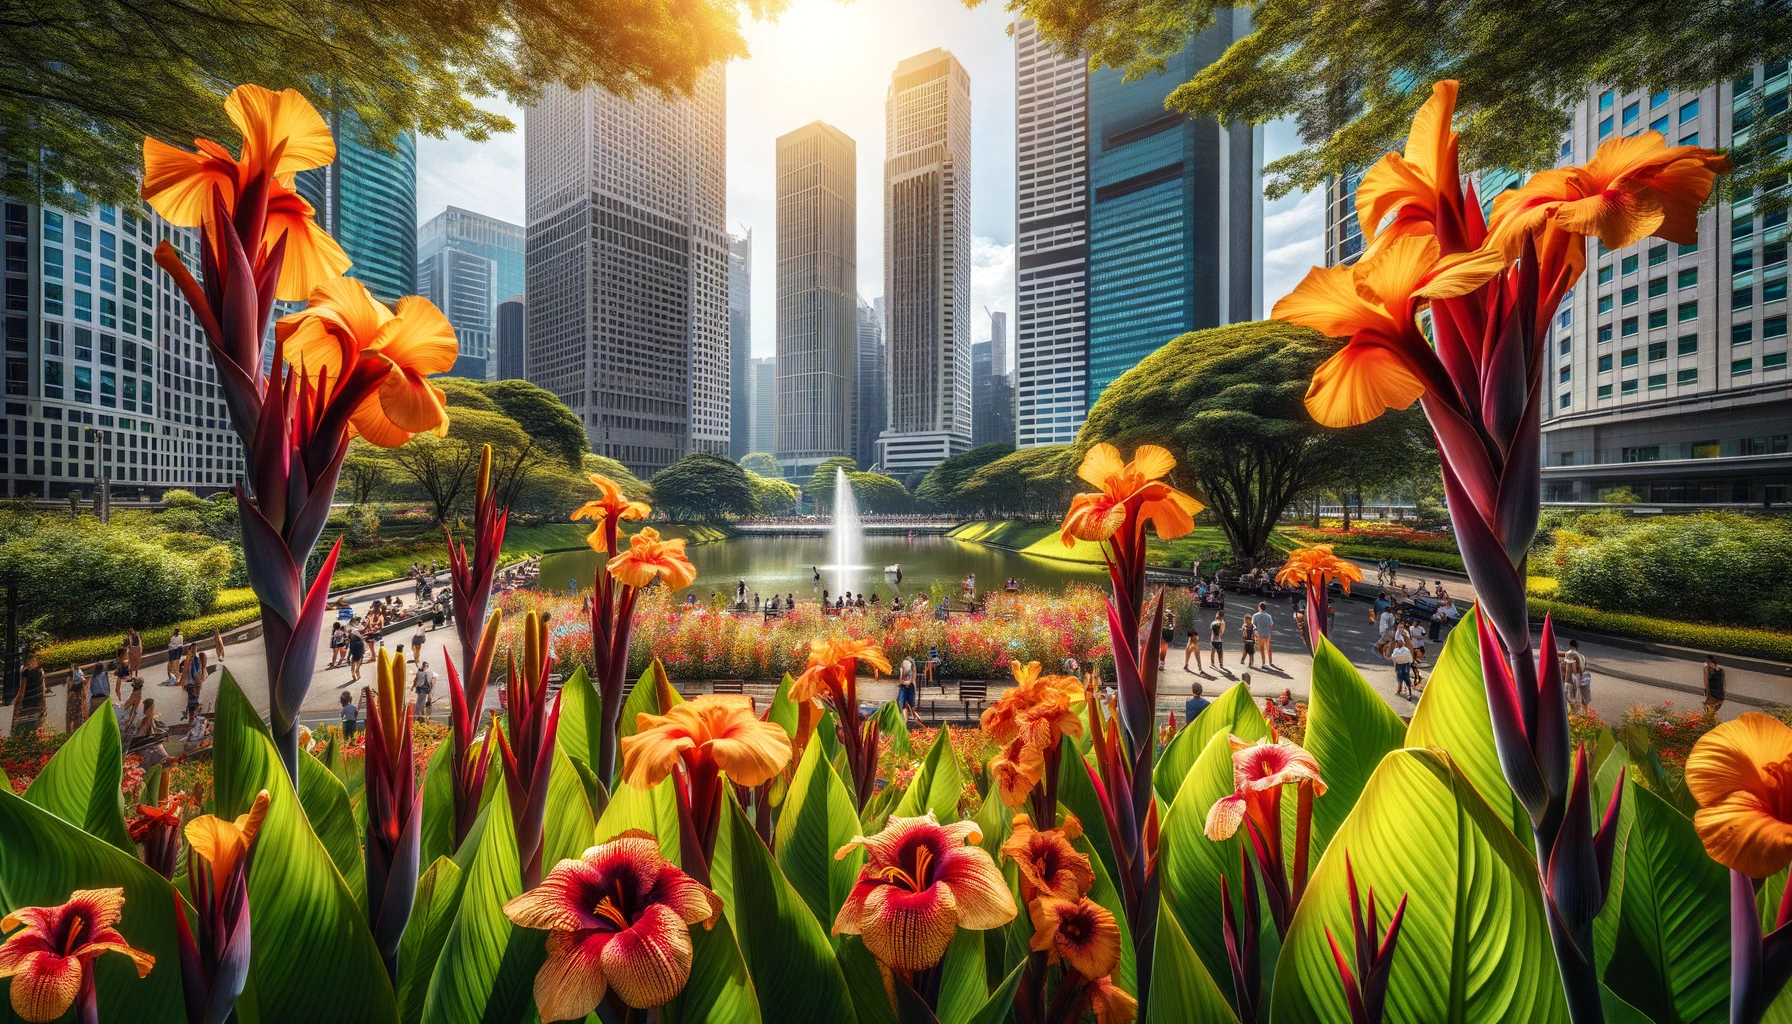 Urban park with colorful flowers and skyscraper backdrop.